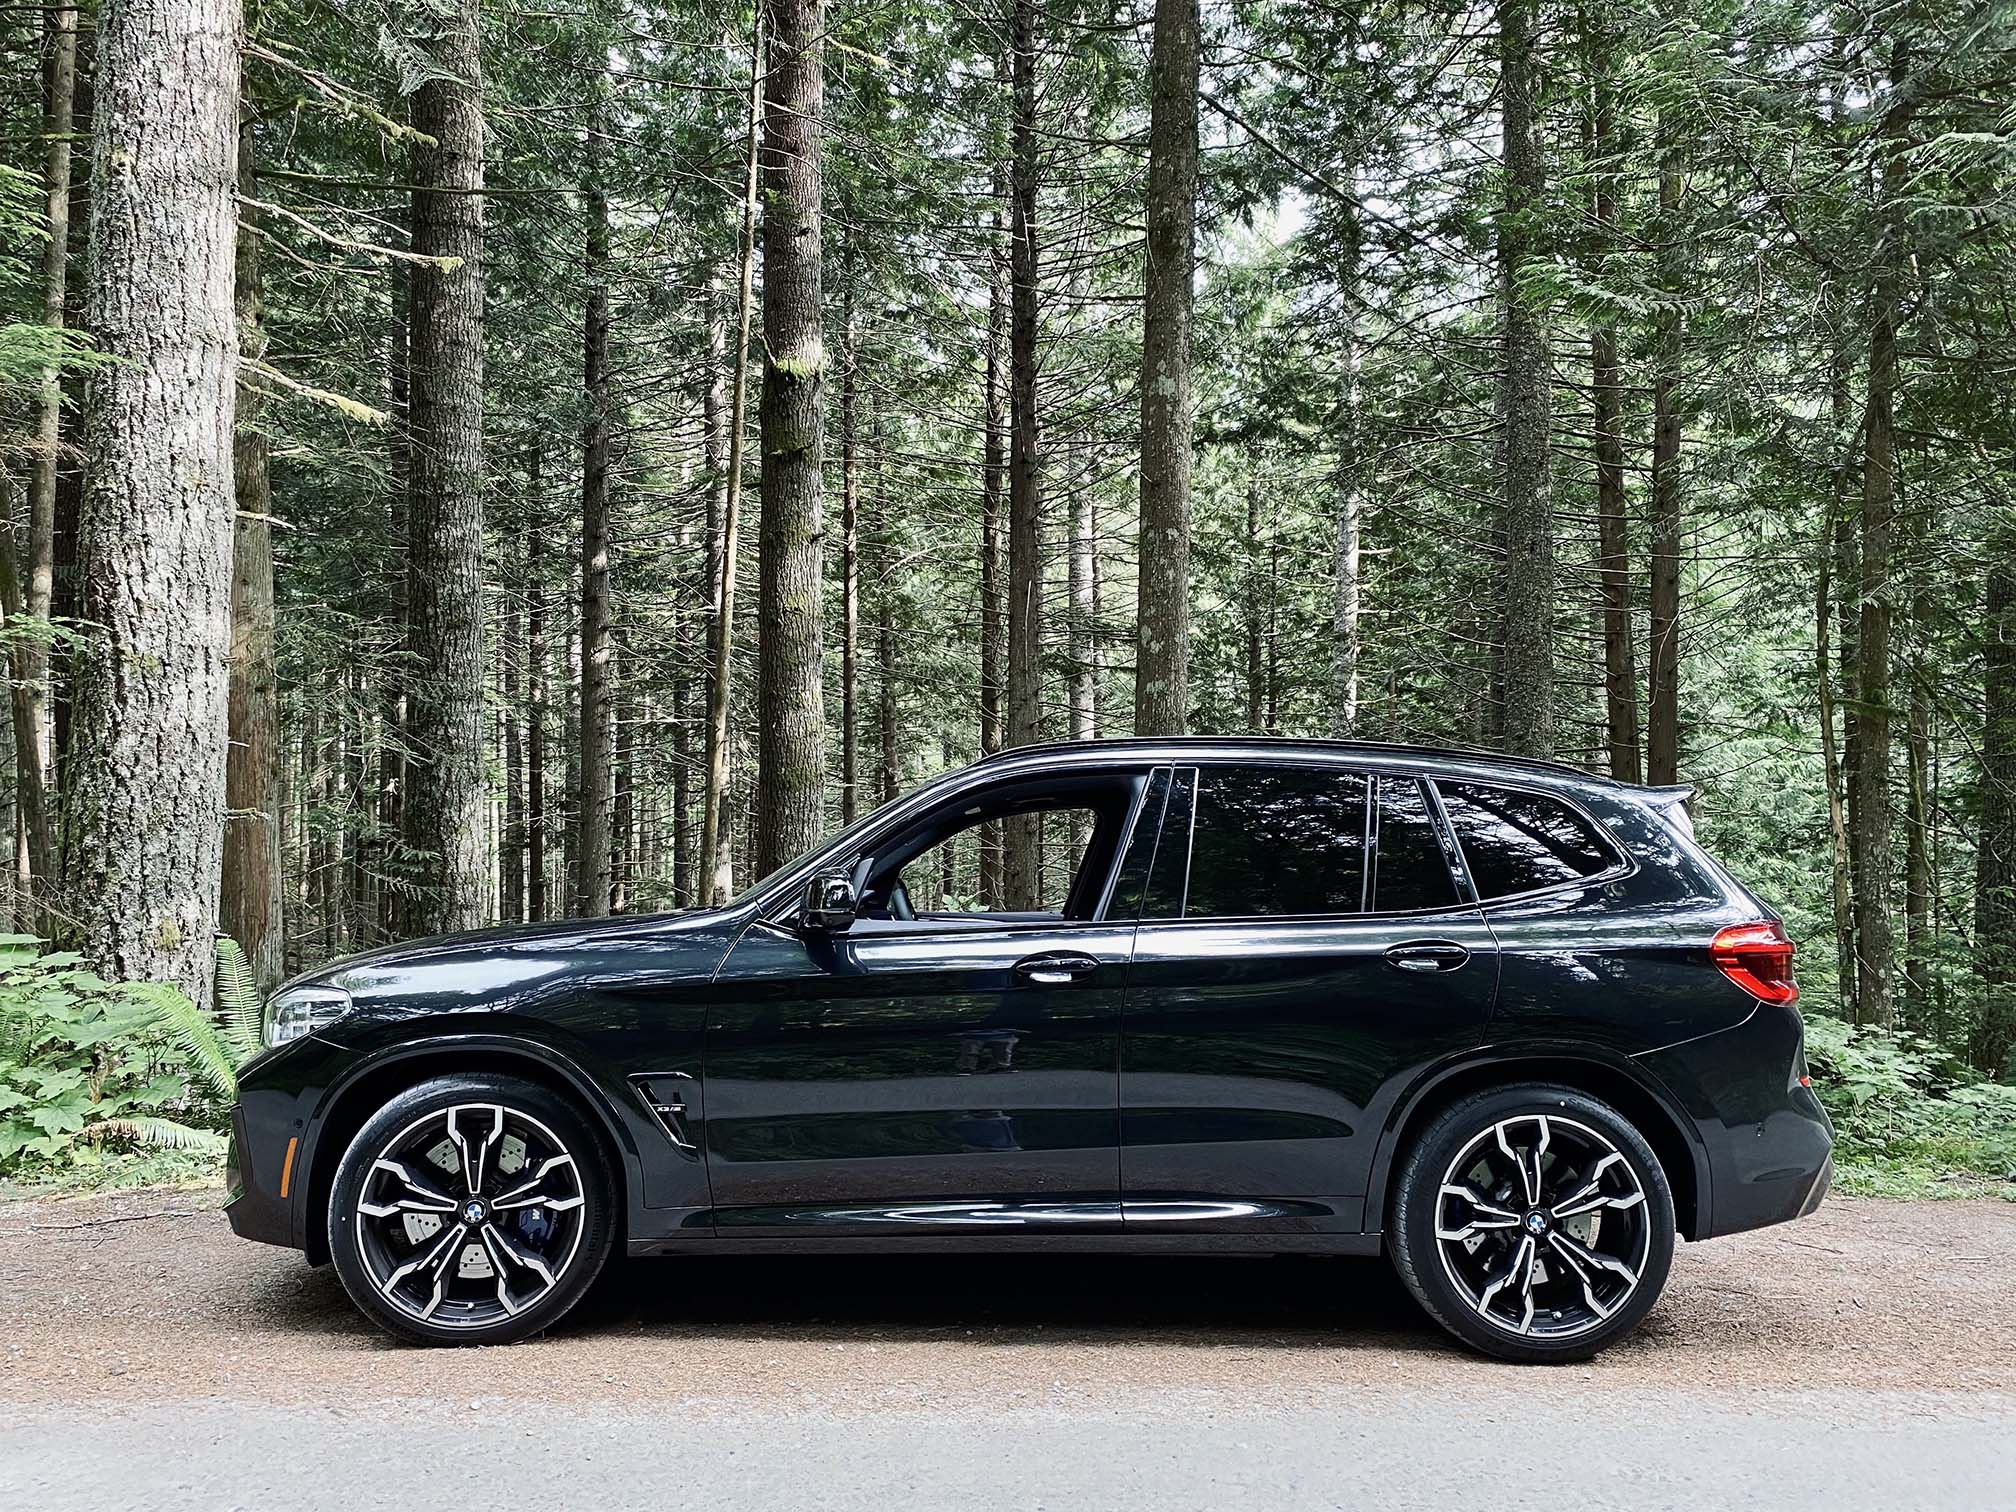 2020 BMW X3 M in the woods